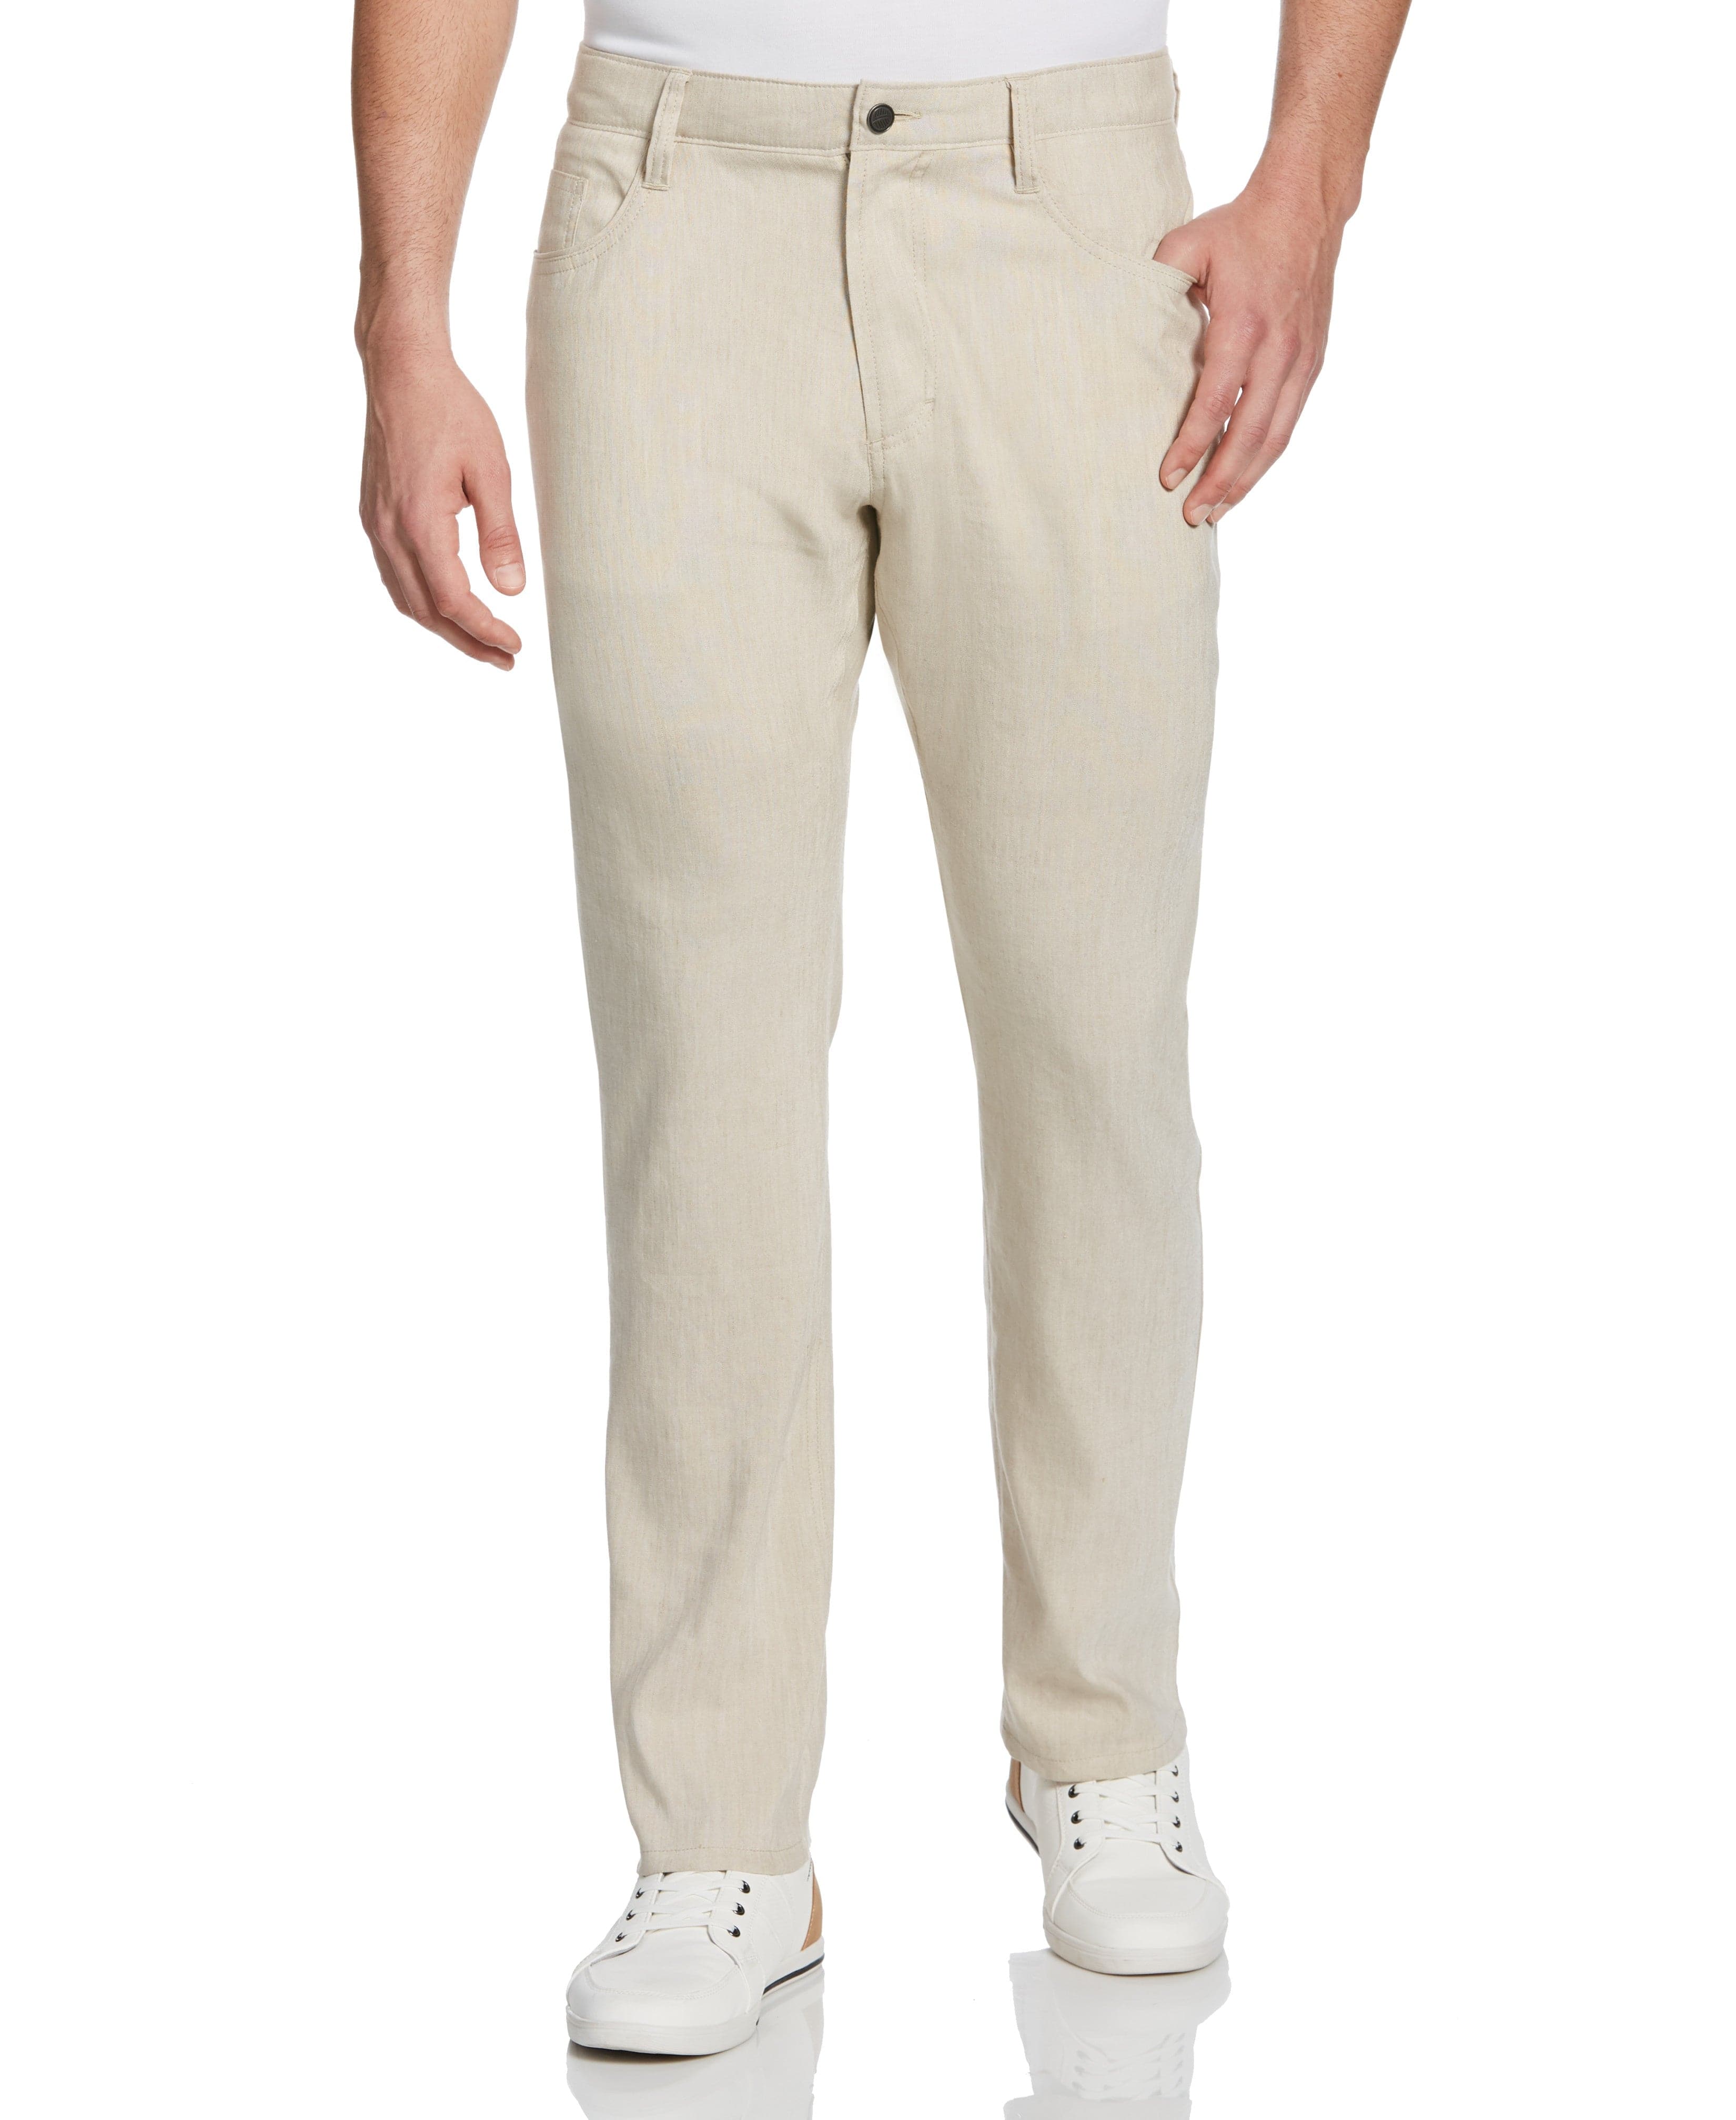 Breathable Natural Linen Pants for Men, Light Pants With Elastic